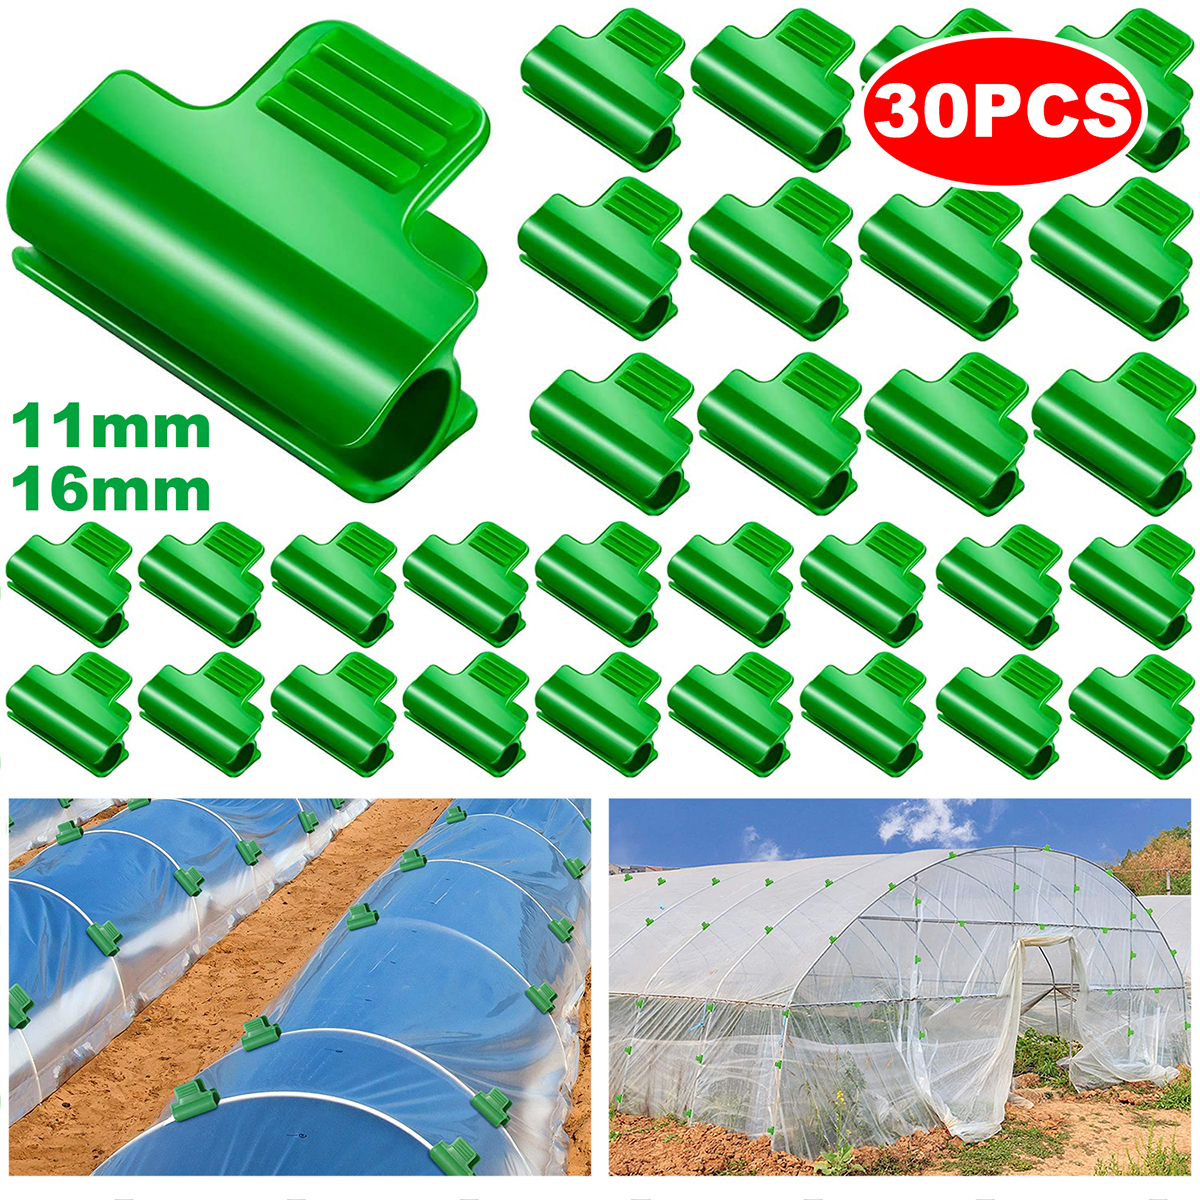 30 Greenhouse Clamps Clips Row Cover Tunnel Hoop Shed Film Shading Net Rod 4cm 